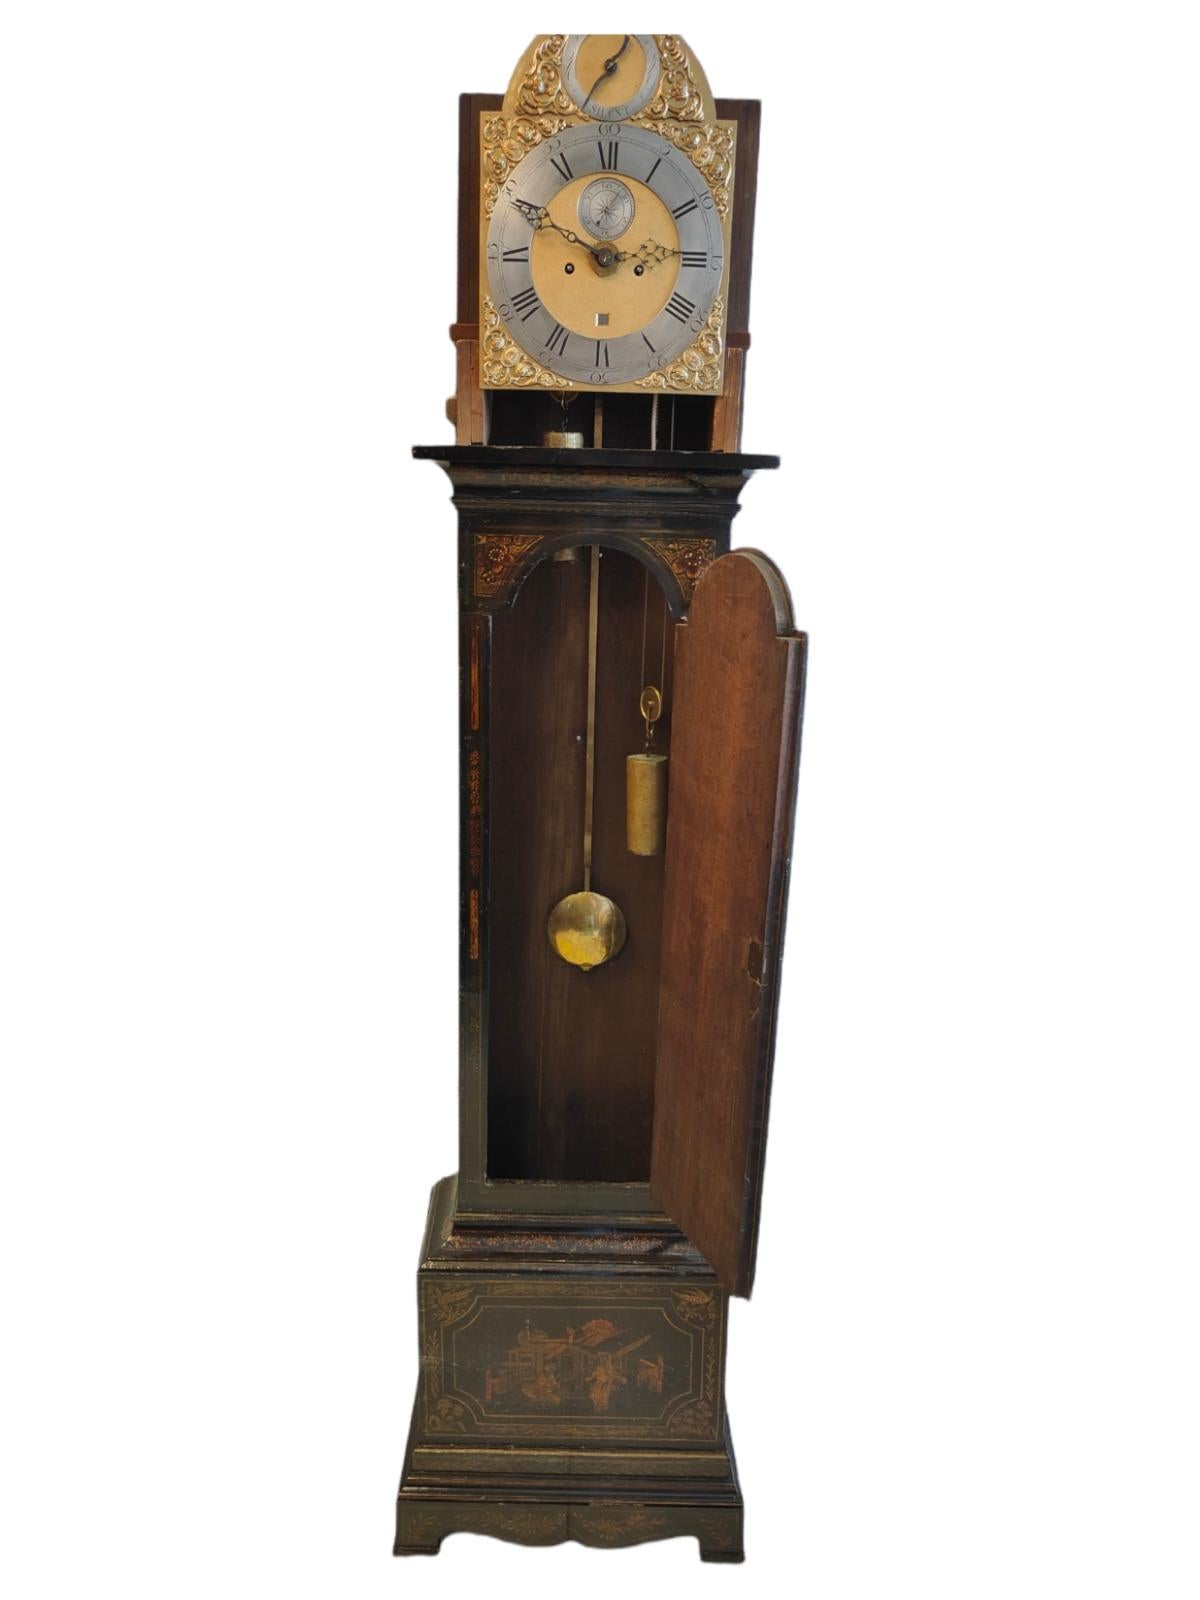 Grand father case clock with Chinese figures xixth
English clock from the 19th century decorated with Asian landscapes. The clock works perfectly and is complete. The box is made of oak. Measures 240 x 50 x 30 cm
Good condition.